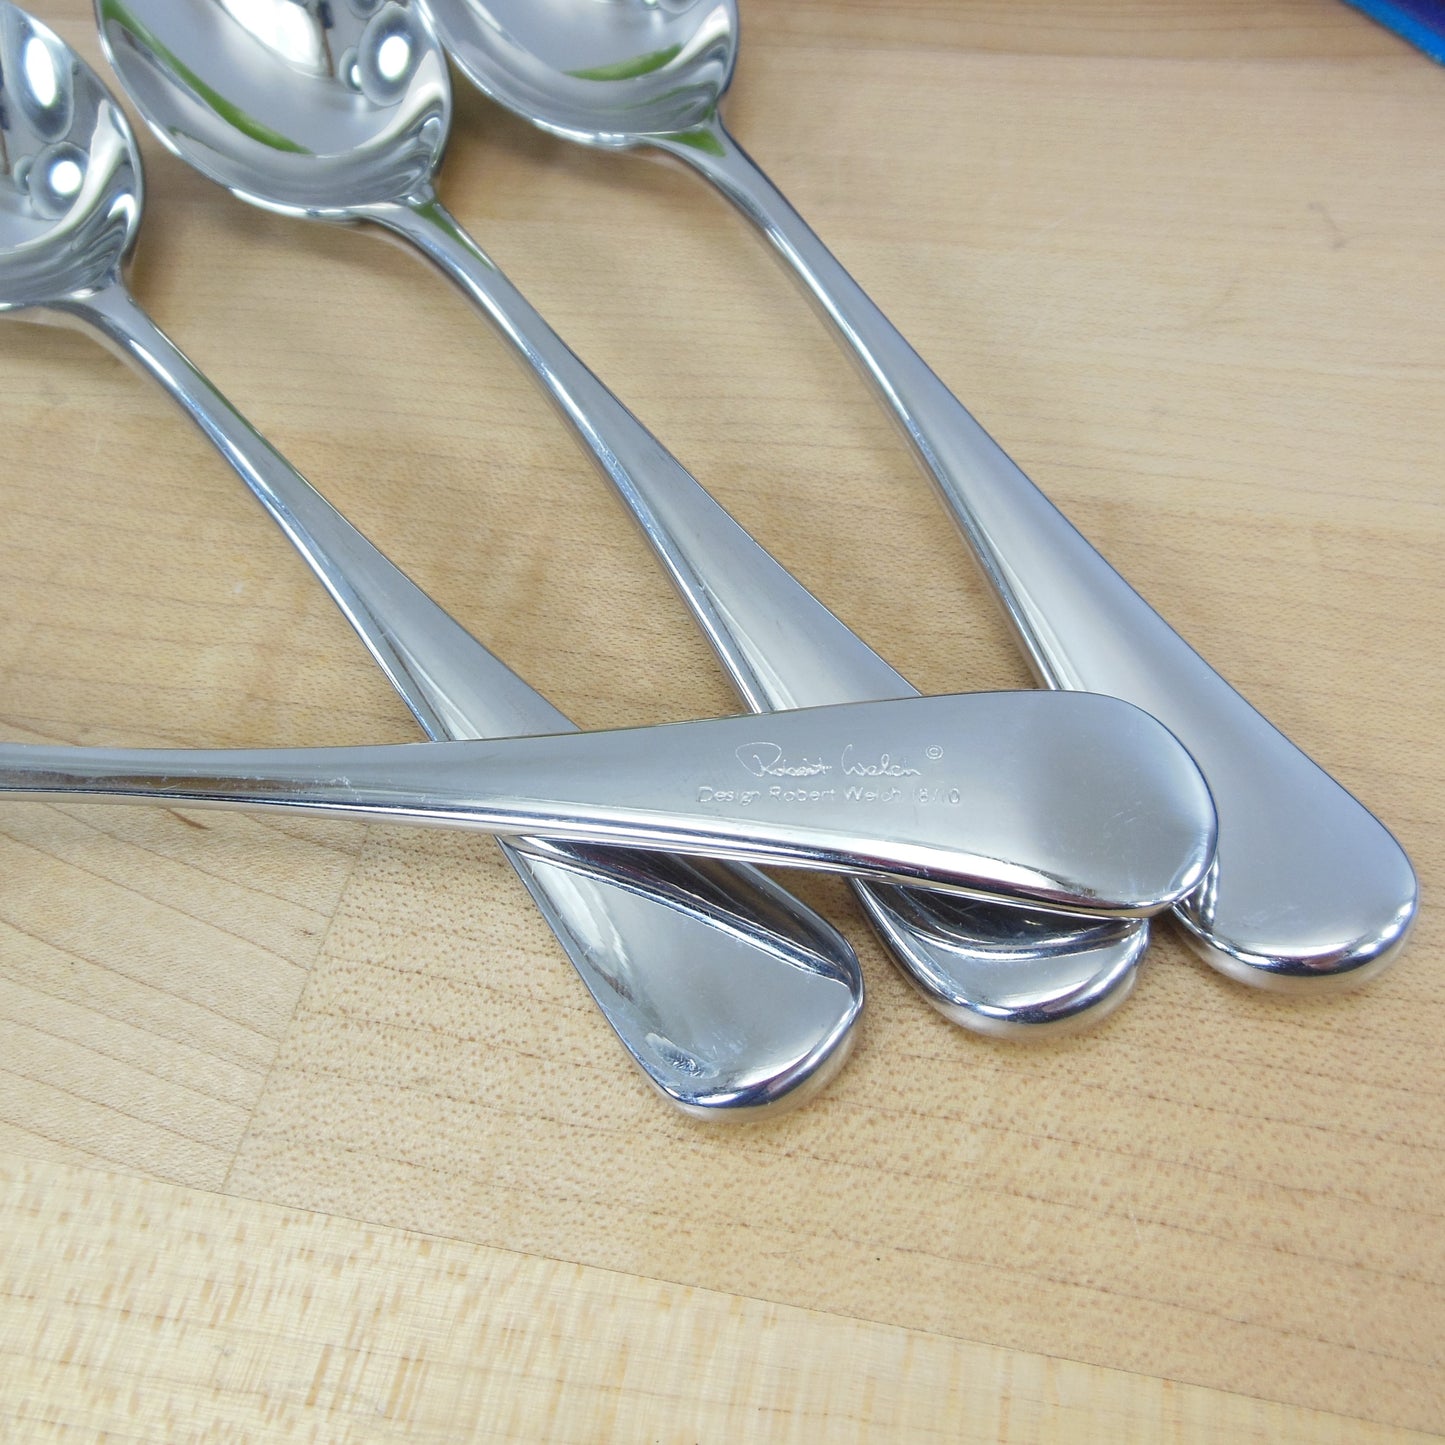 Robert Welch Caesna Mirror Stainless - 4 Set Place Spoons